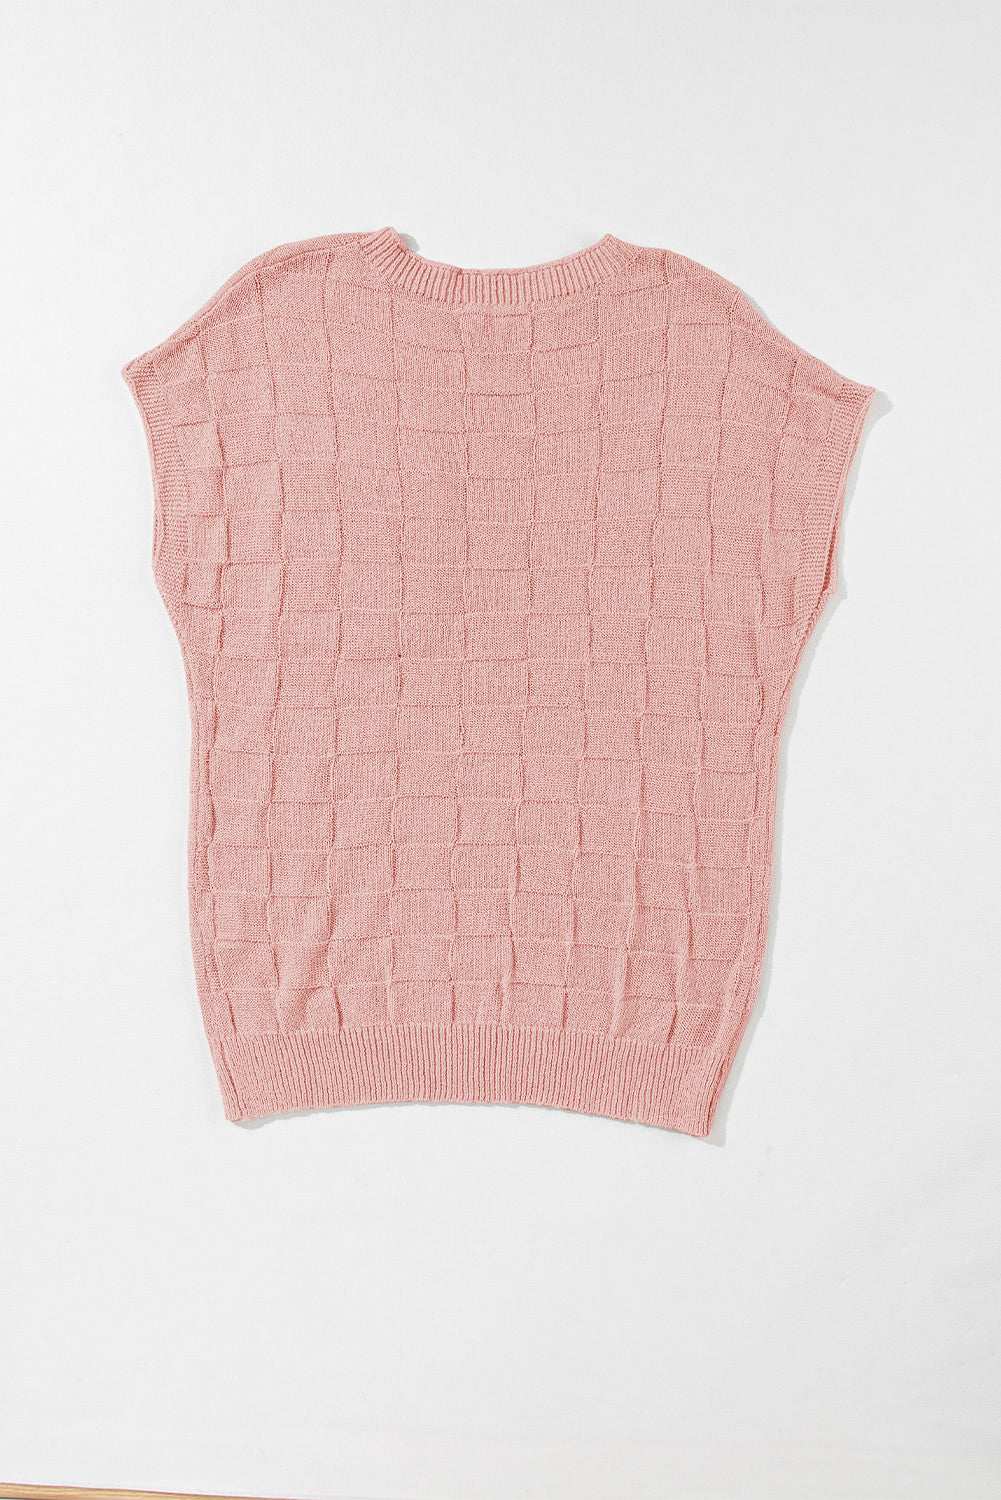 Dusty Pink Lattice Textured Knit Short Sleeve Baggy Sweater